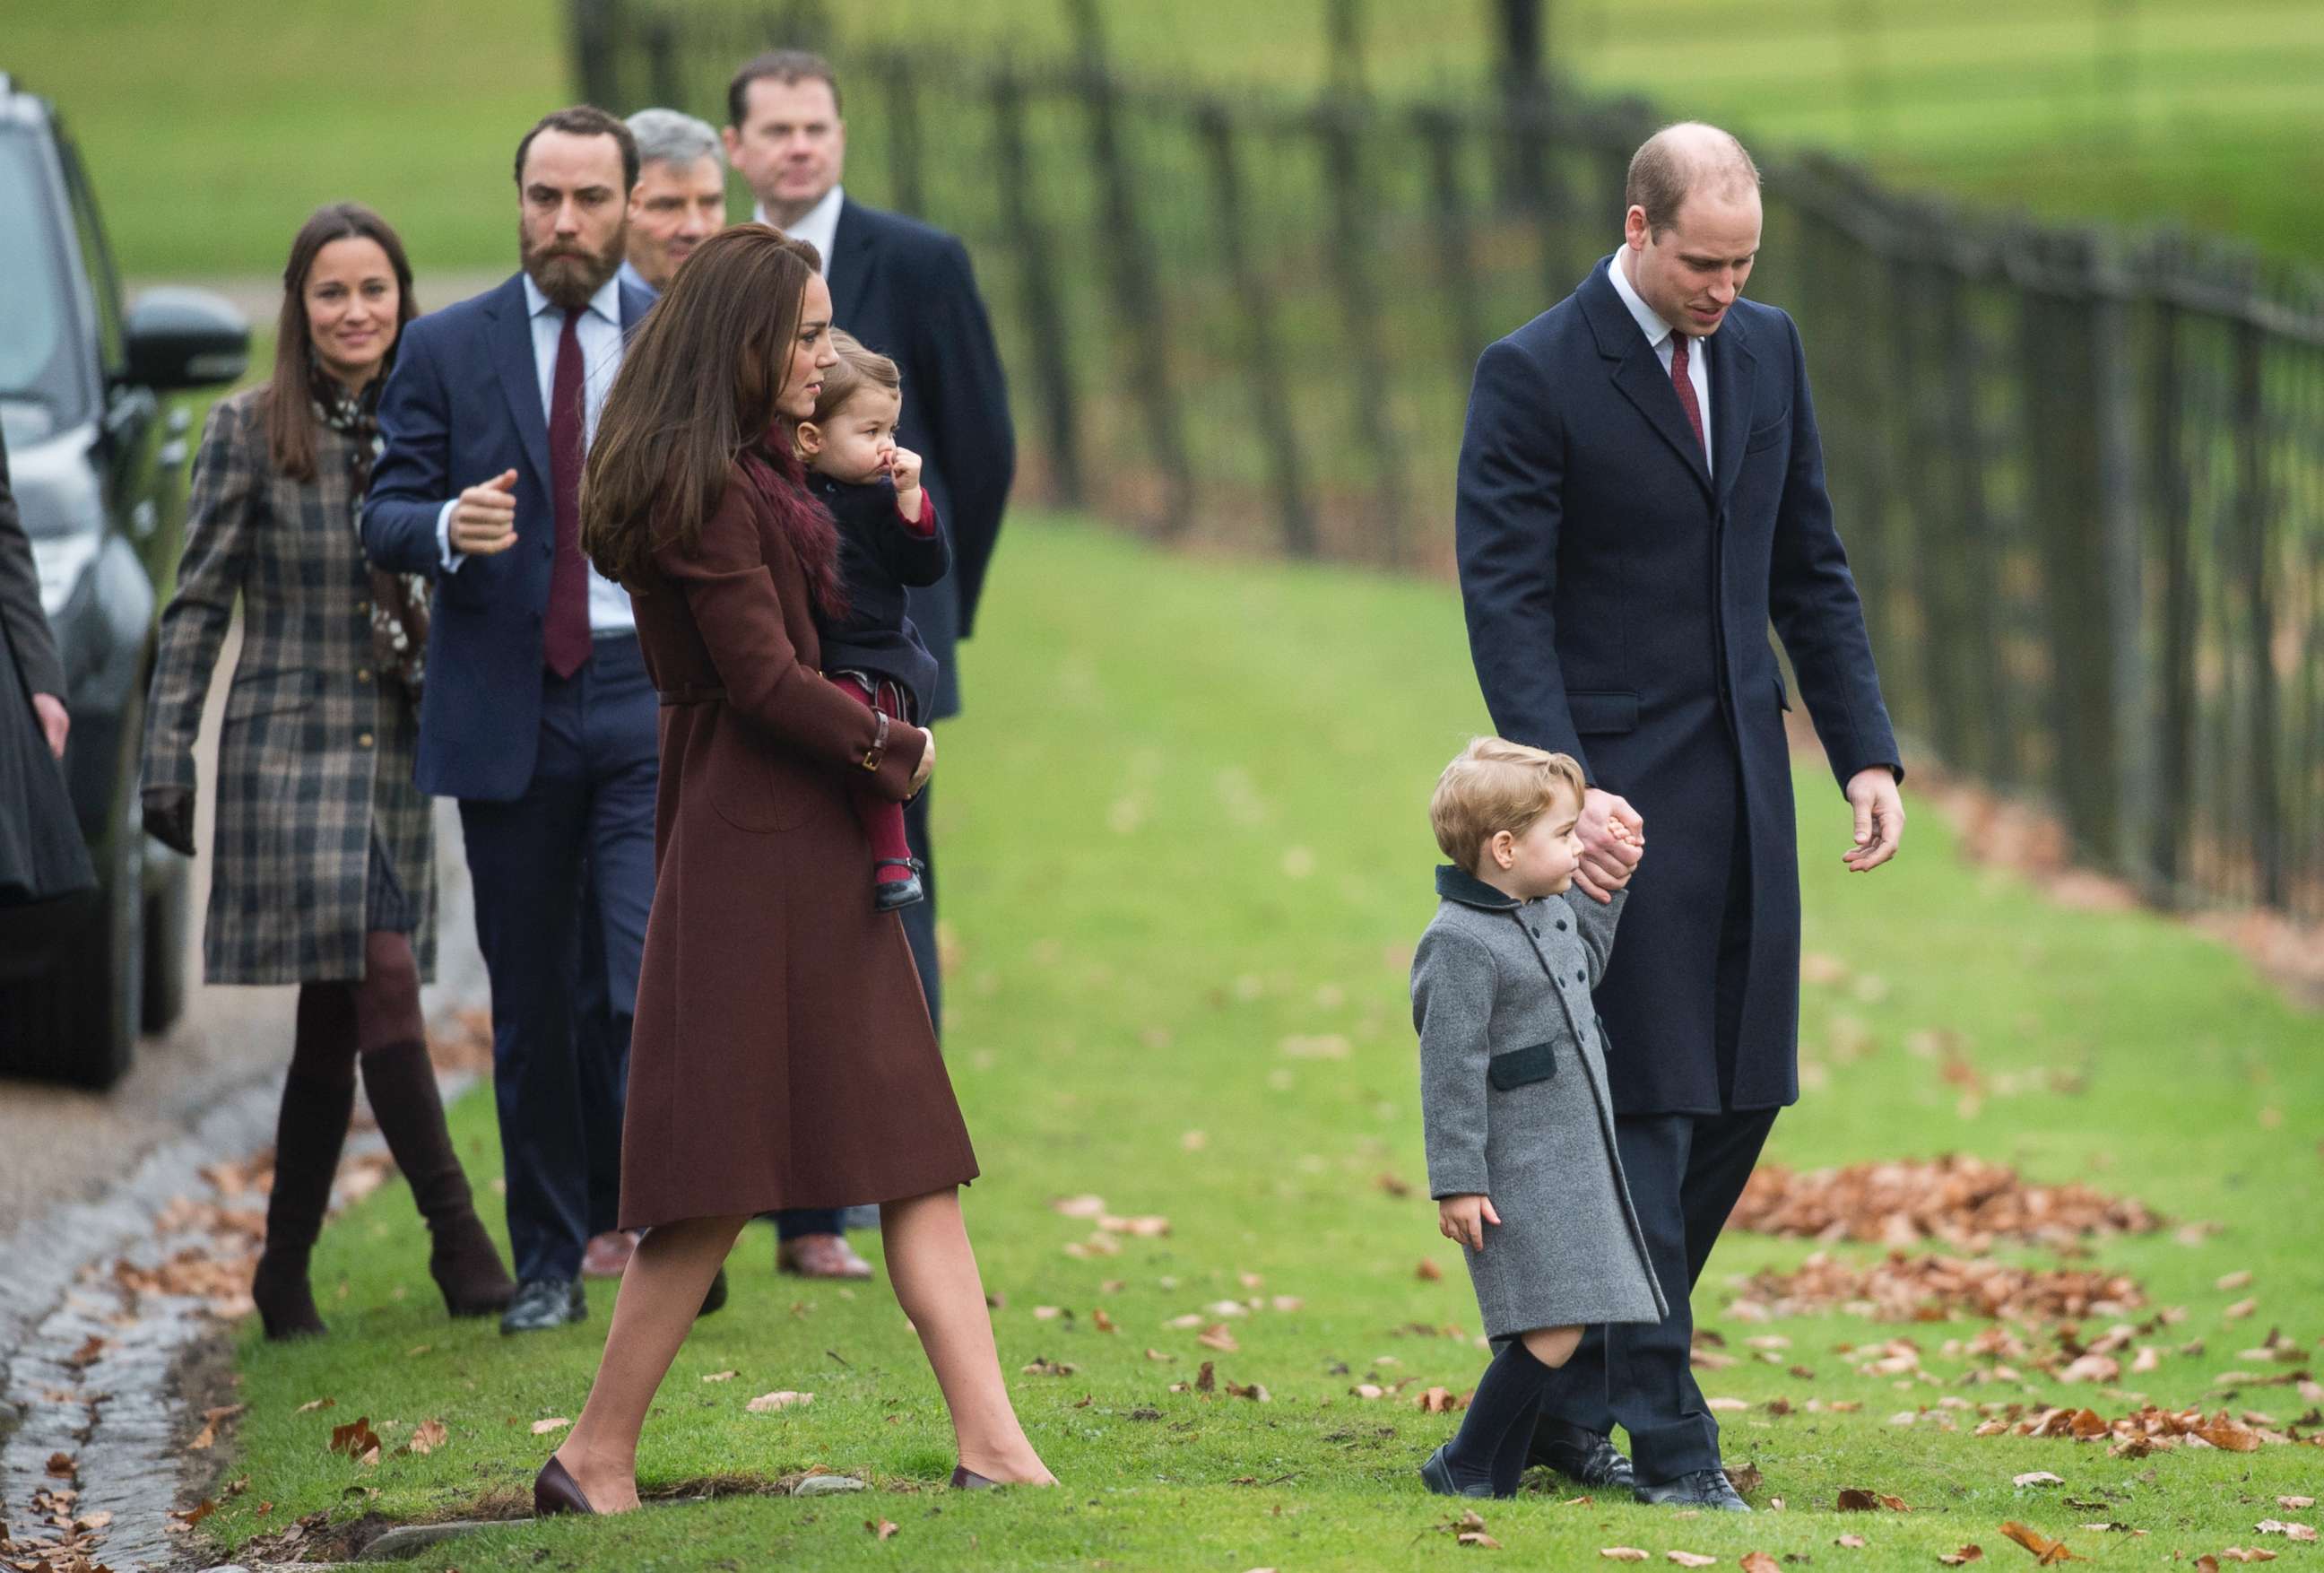 PHOTO: In this file photo, Prince William, Duke of Cambridge, Catherine, Duchess of Cambridge, Prince George of Cambridge, Princess Charlotte of Cambridge, Pippa Middleton and James Middleton attend Church, Dec. 25, 2016, in Bucklebury, Berkshire, U.K.